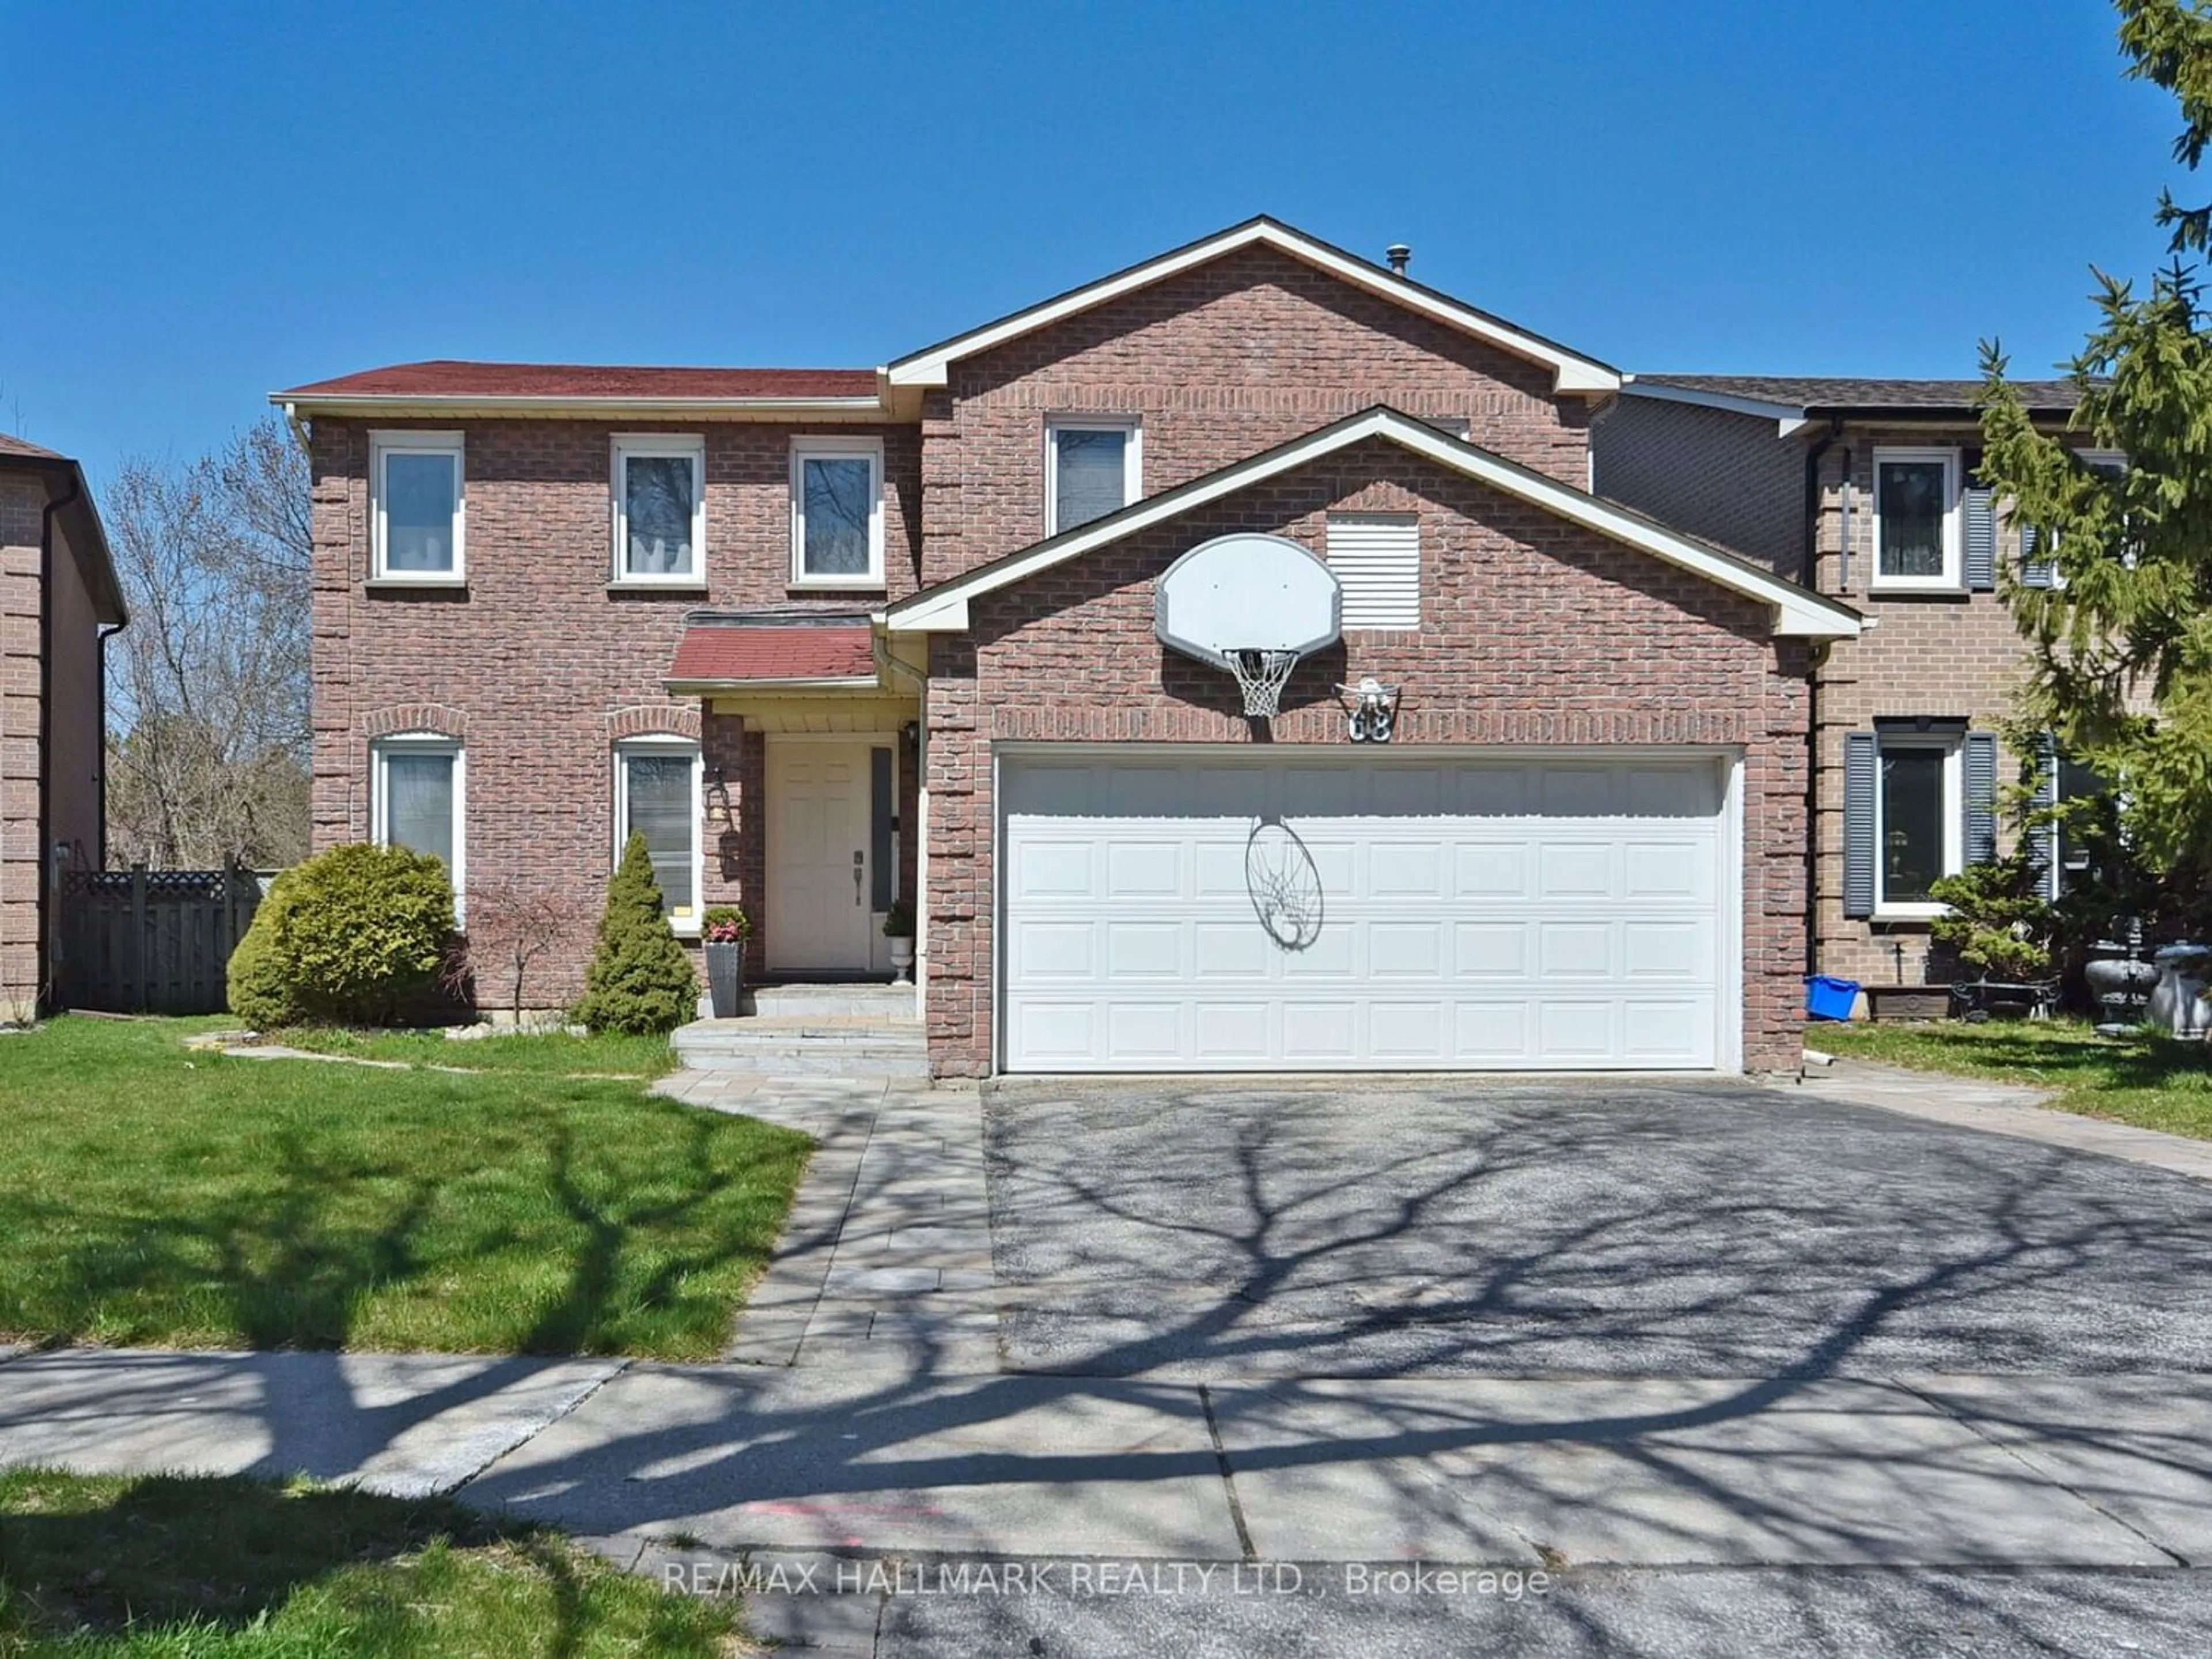 Home with brick exterior material for 68 Nightstar Dr, Richmond Hill Ontario L4C 8H5